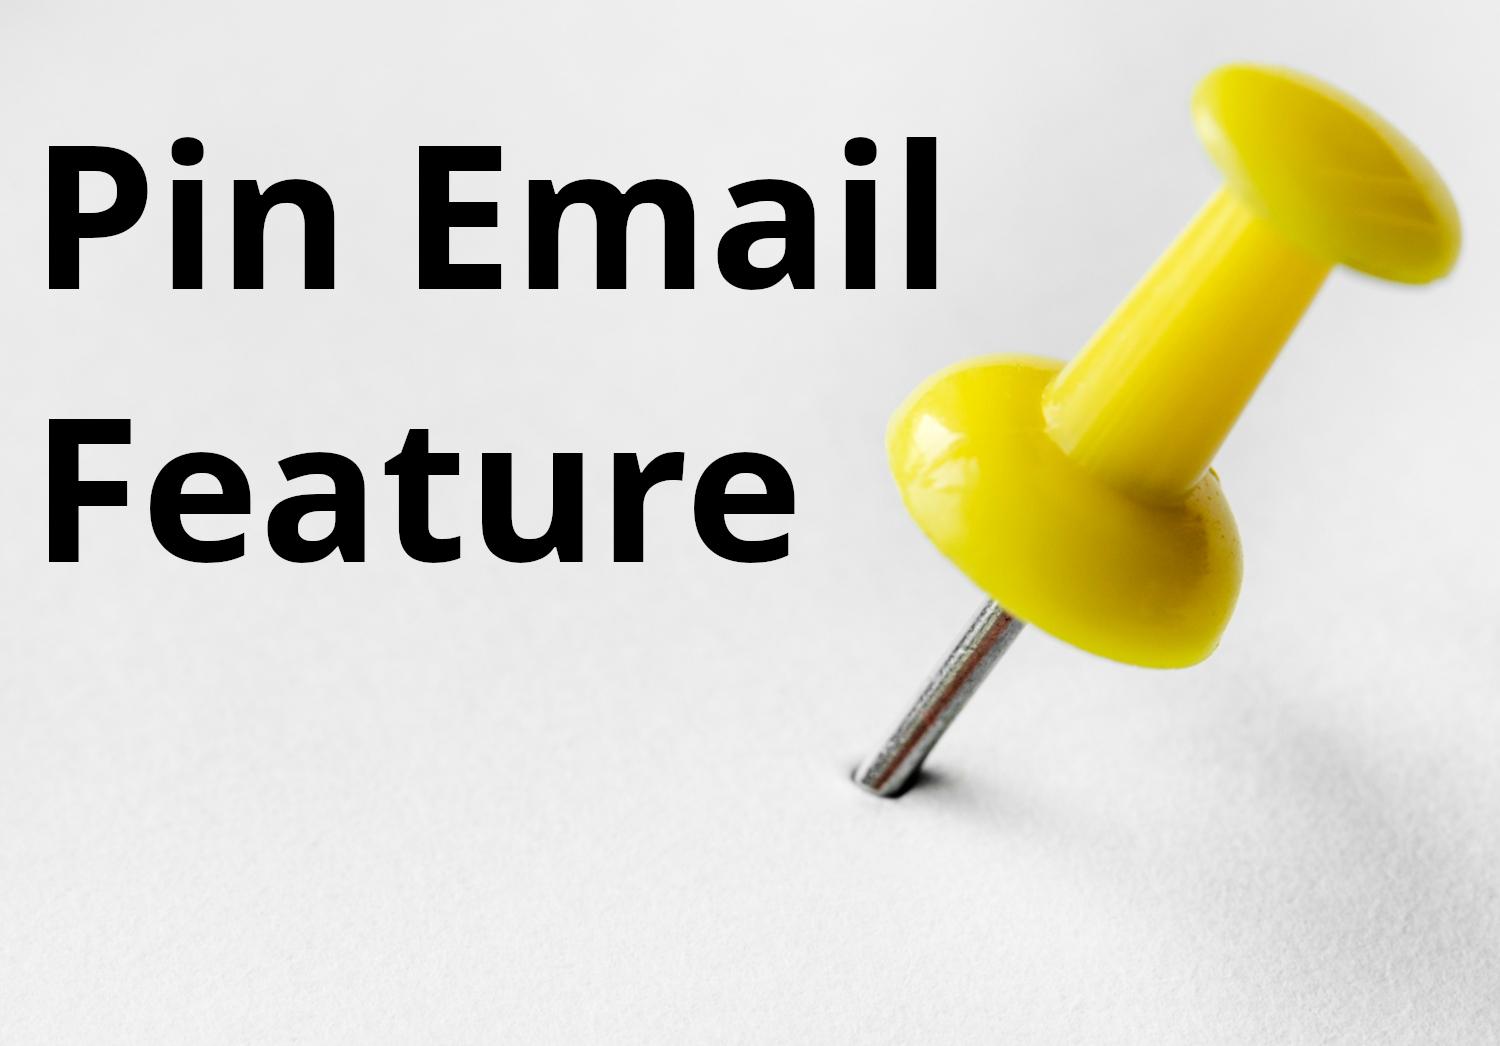 How to use Pin Email Feature